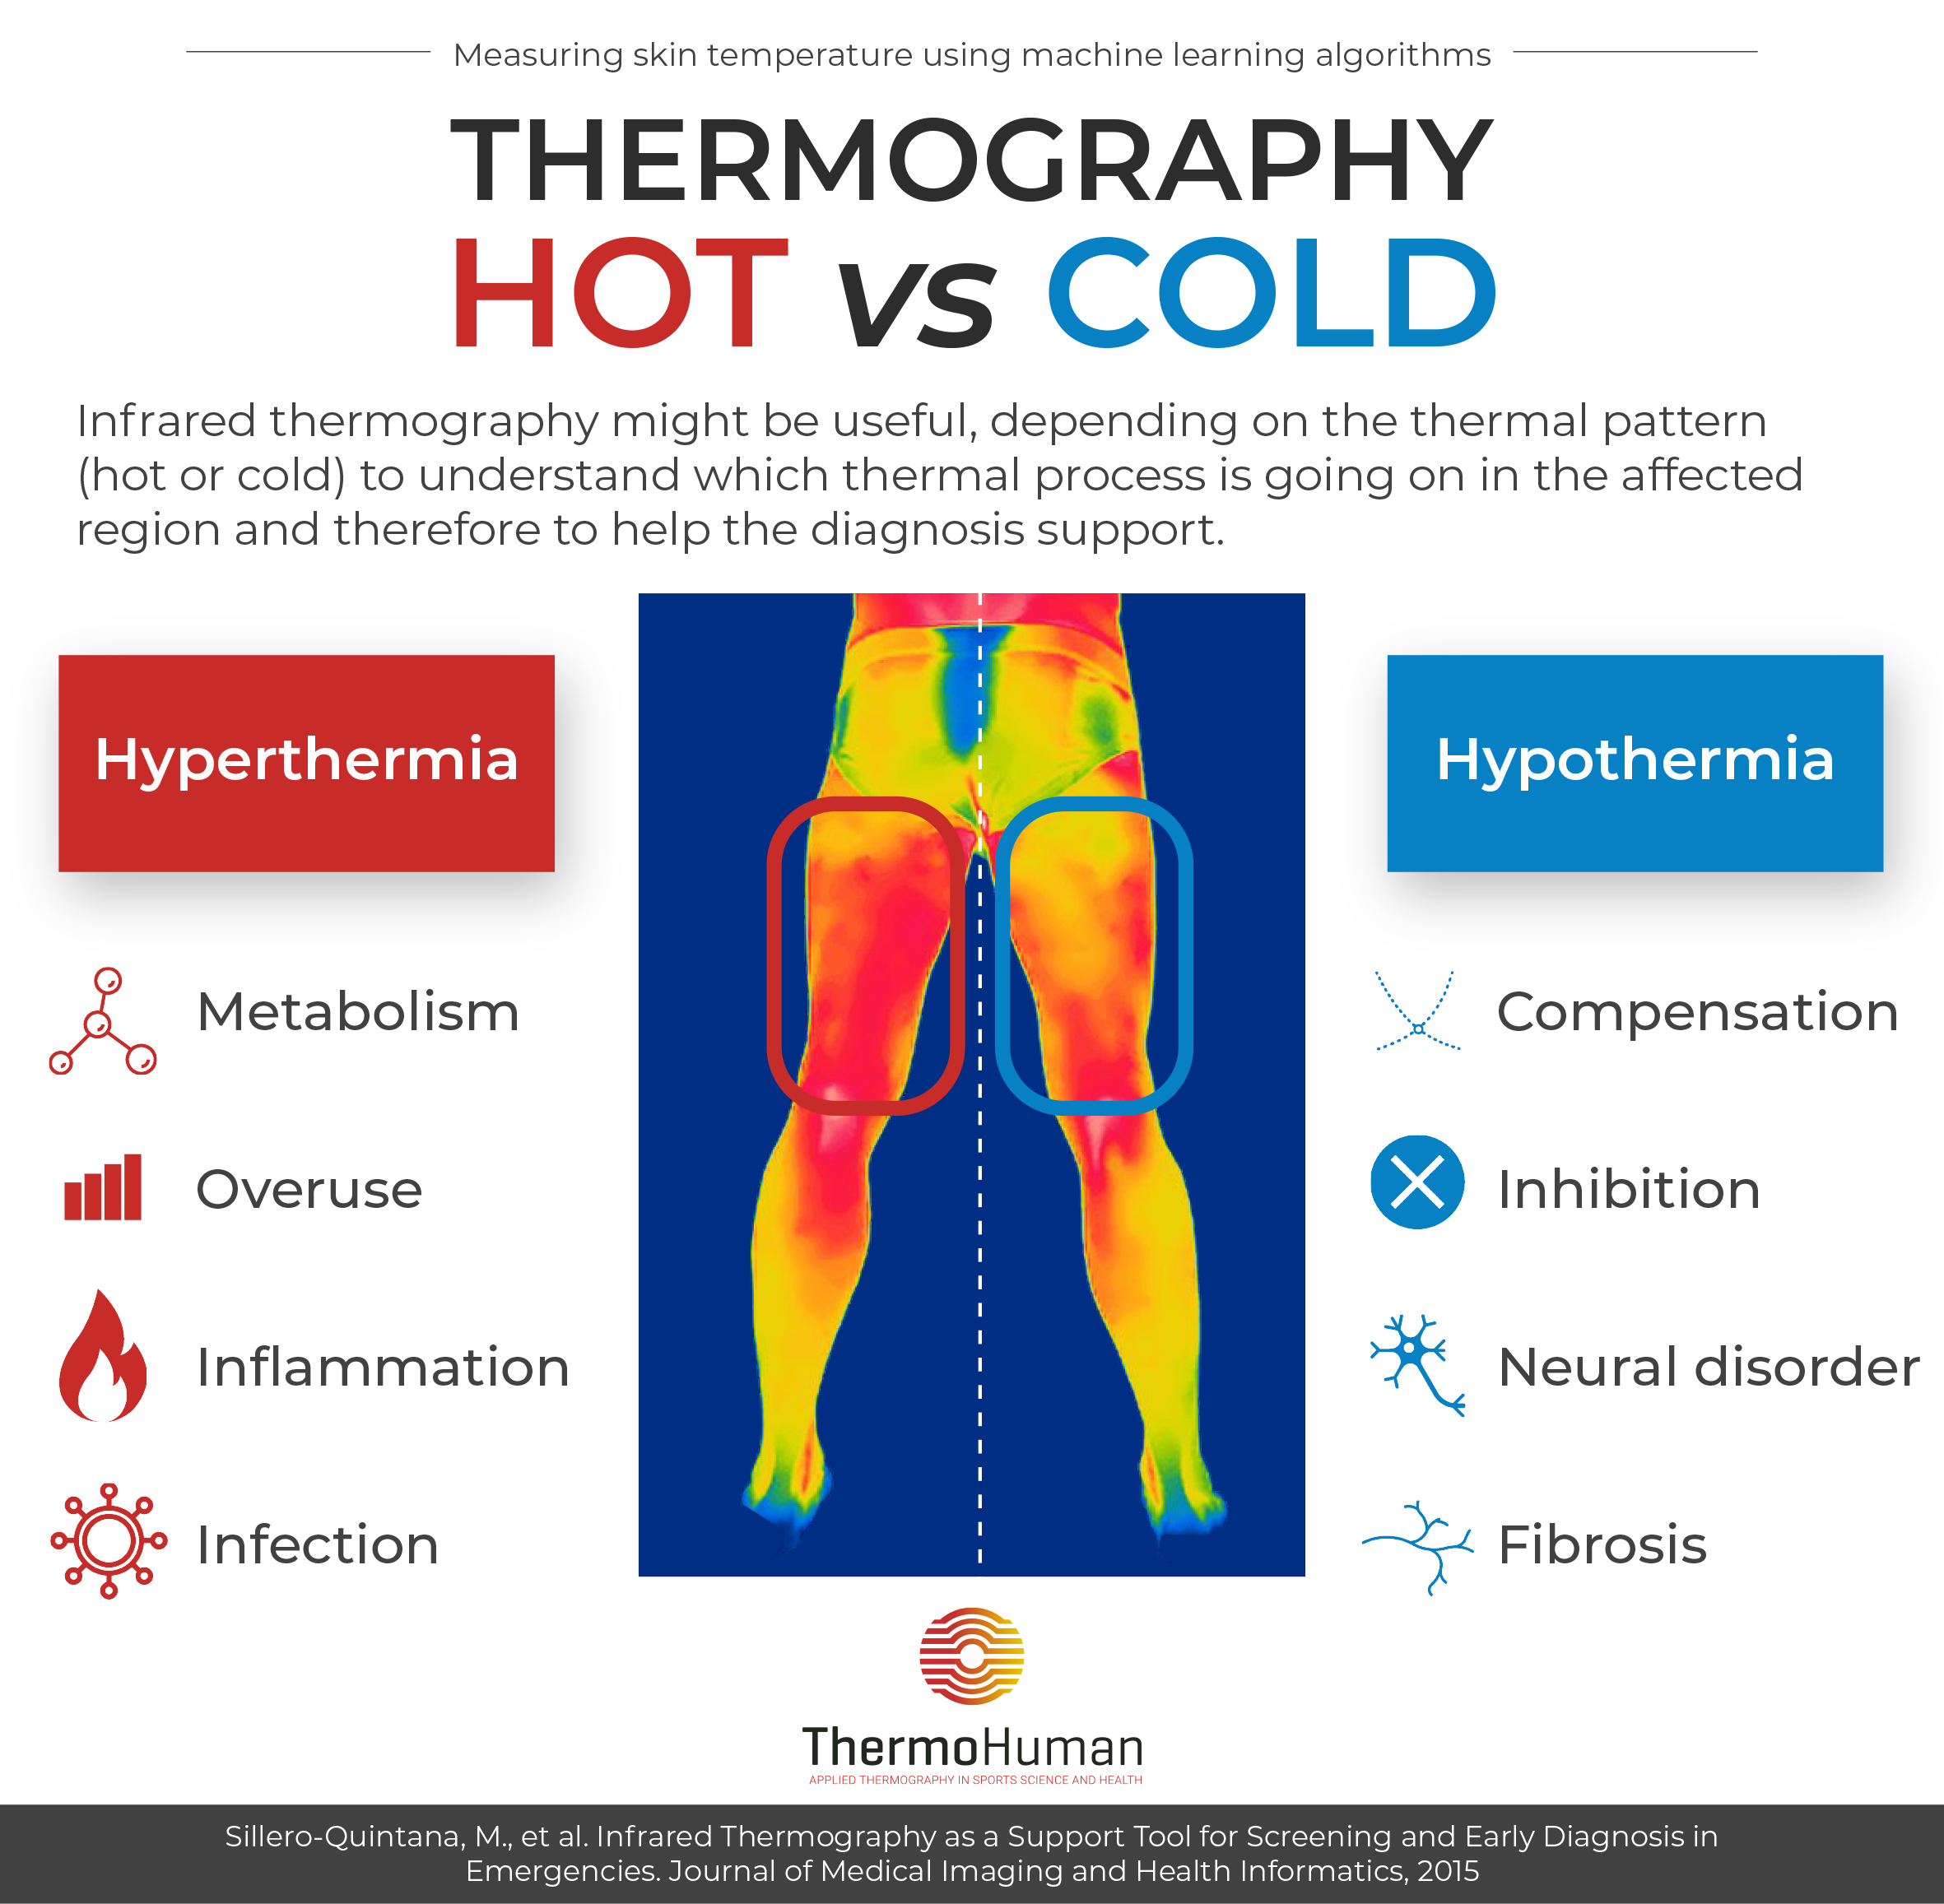 Is Infrared Hot or Cold?